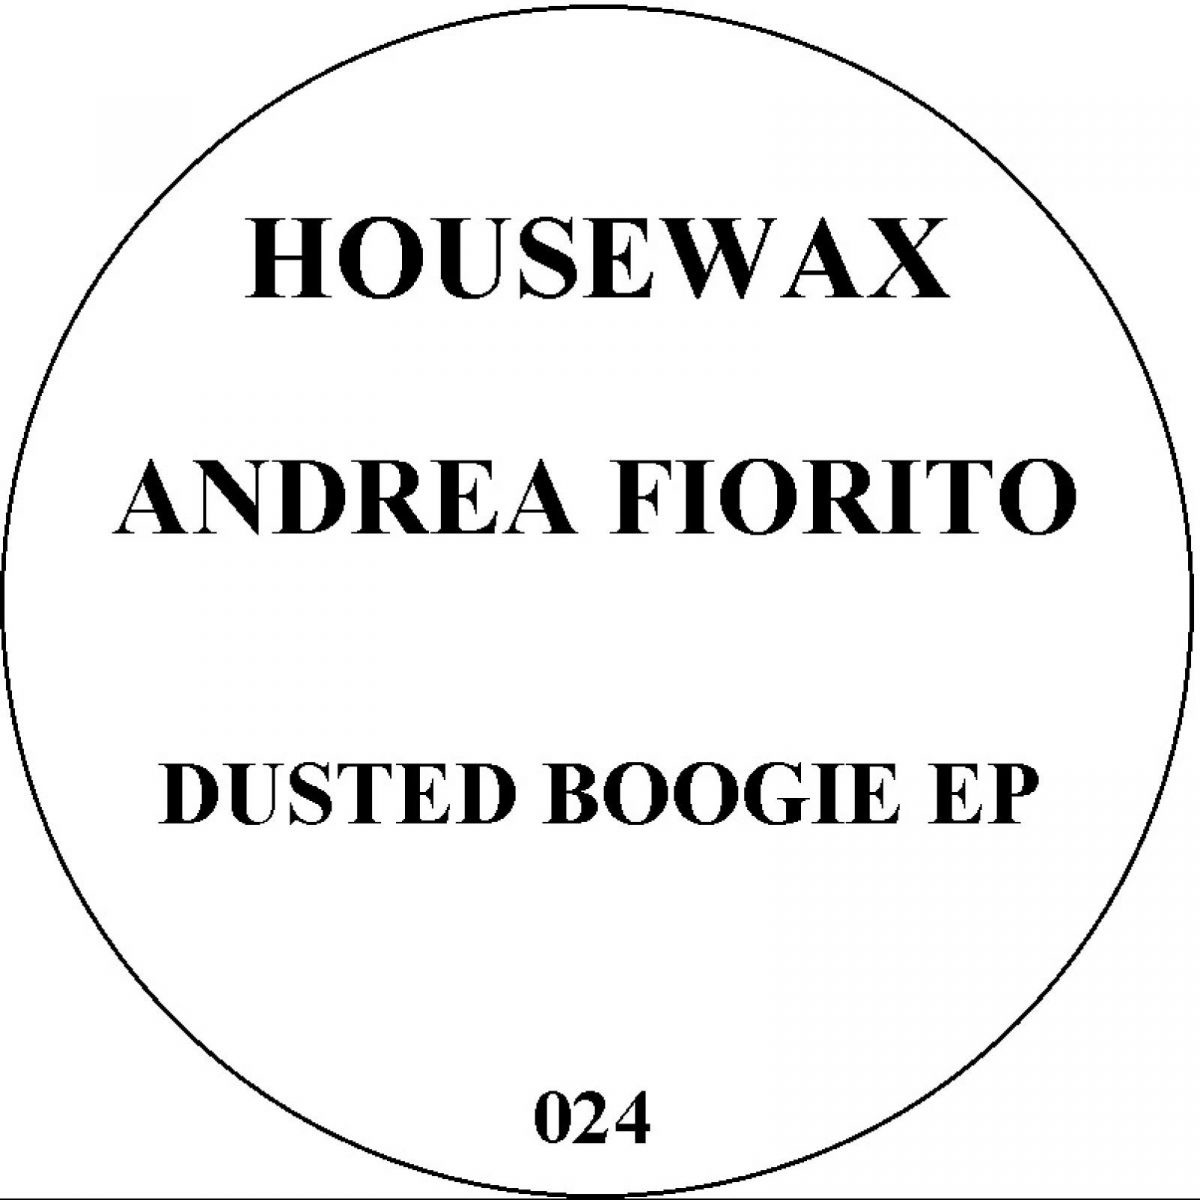 Andrea Fiorito - Dusted Boogie / Housewax